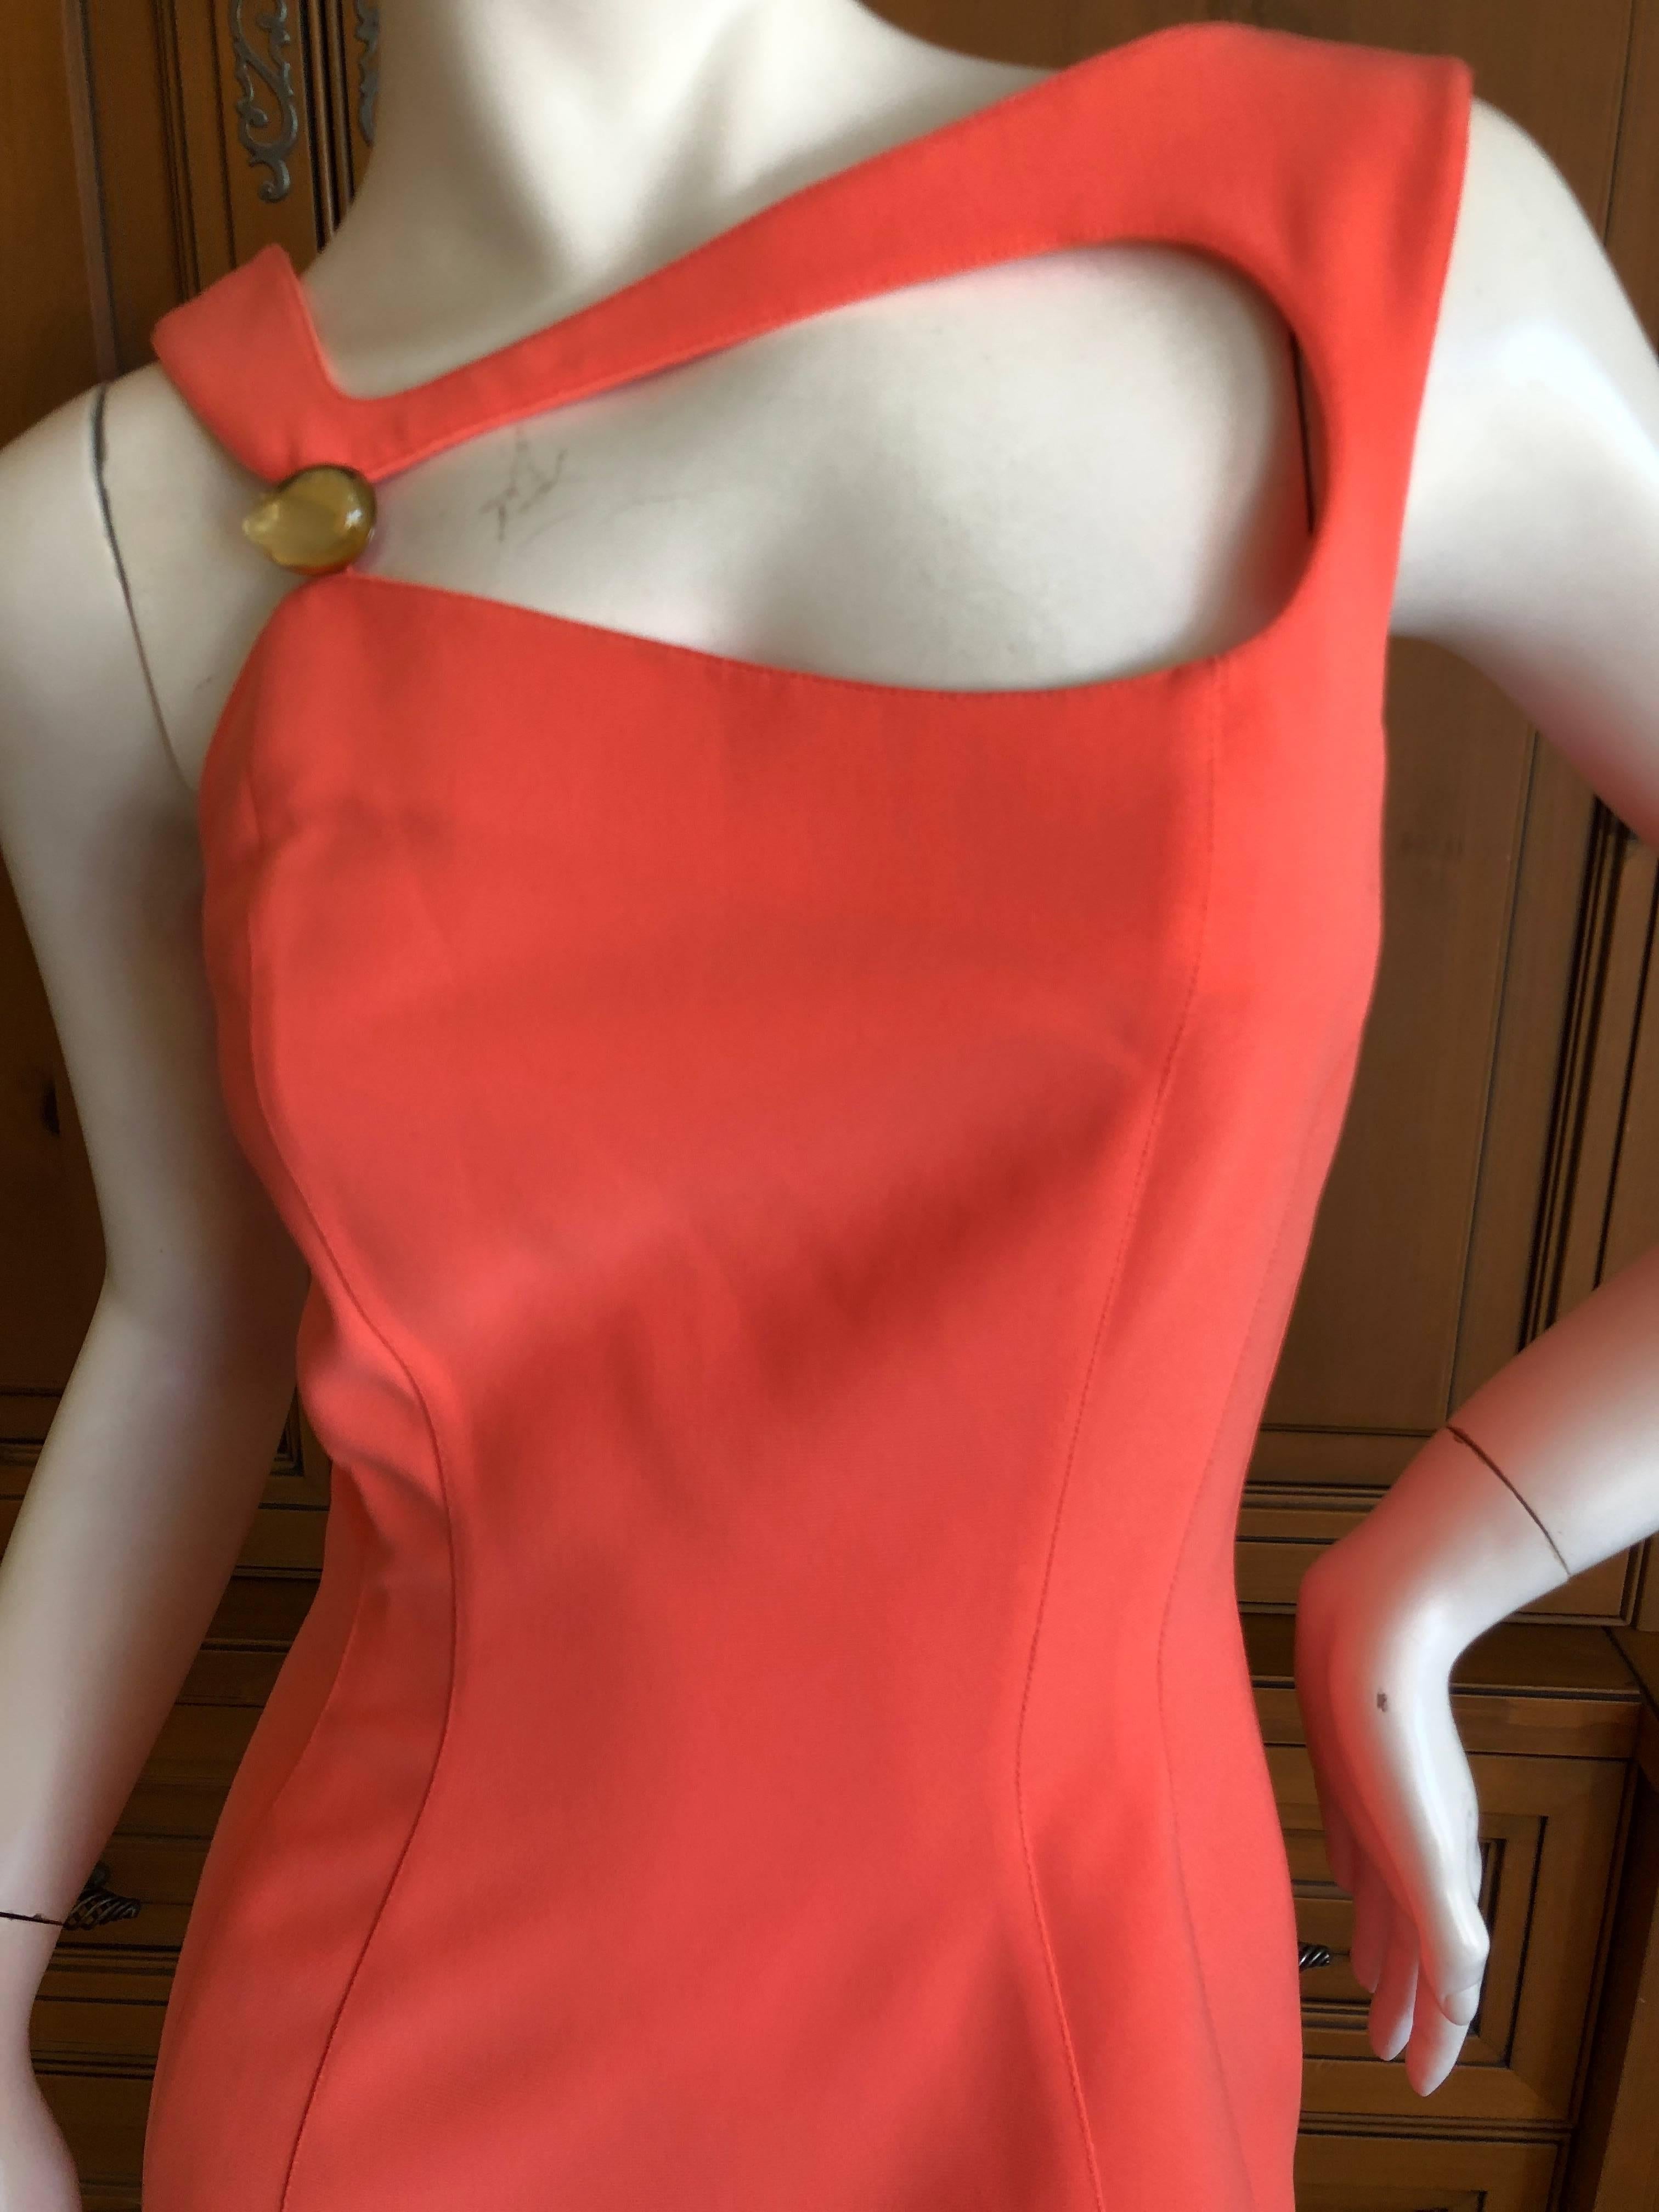 
	
	
Thierry Mugler Mod Vintage 80's Tangerine Cut Out Dress with Cabochon Ornament 
Size 36

Bust 32" 

Waist 28"  

Hips 39" 

Length 42"

 Excellent condition